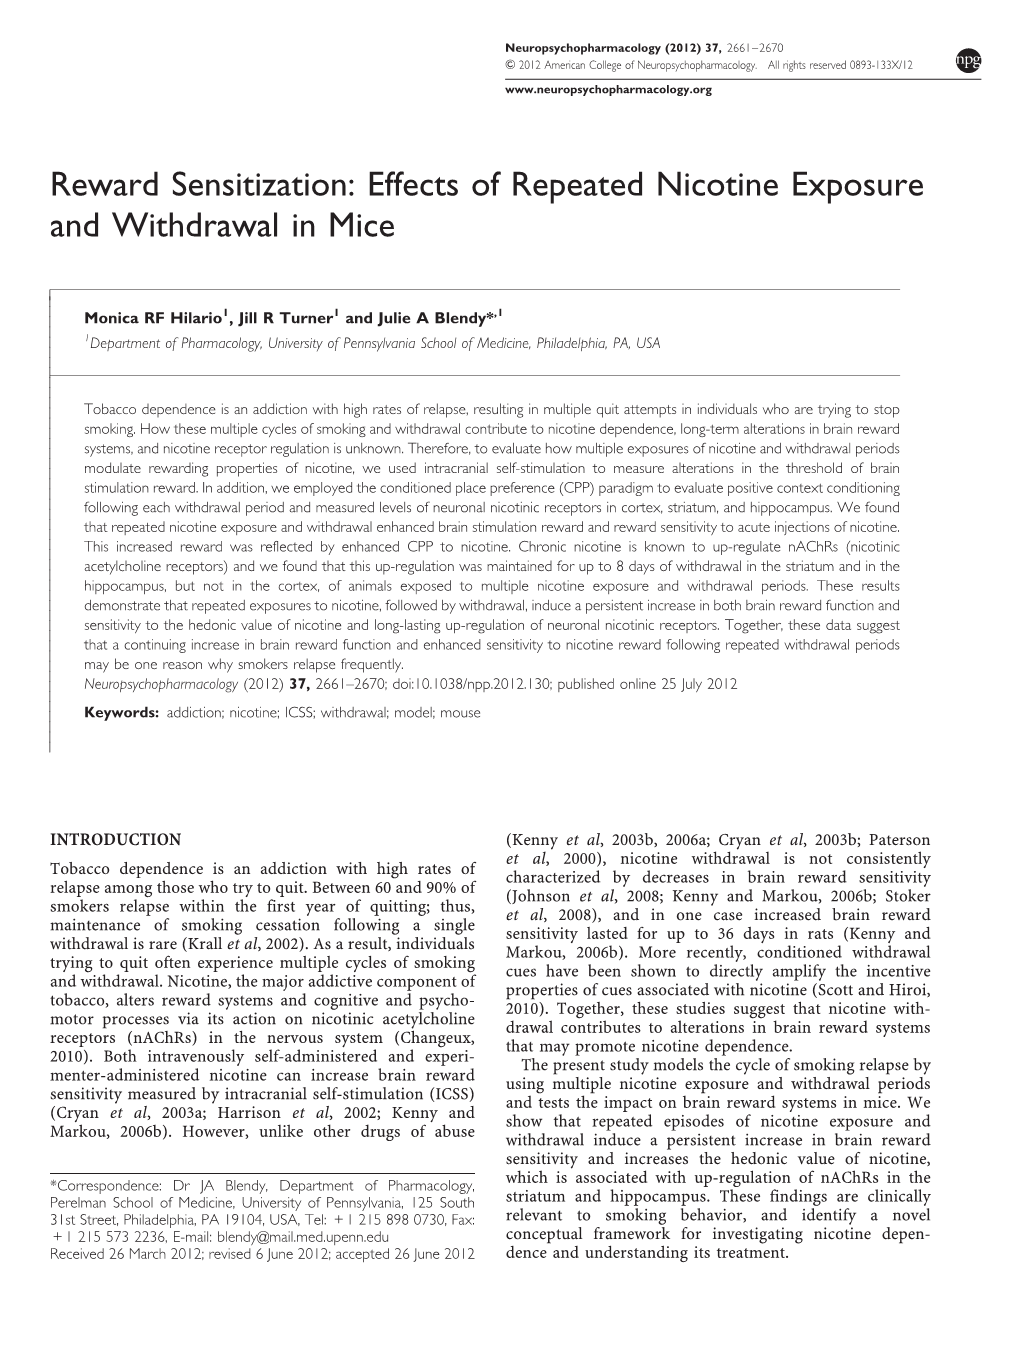 Effects of Repeated Nicotine Exposure and Withdrawal in Mice